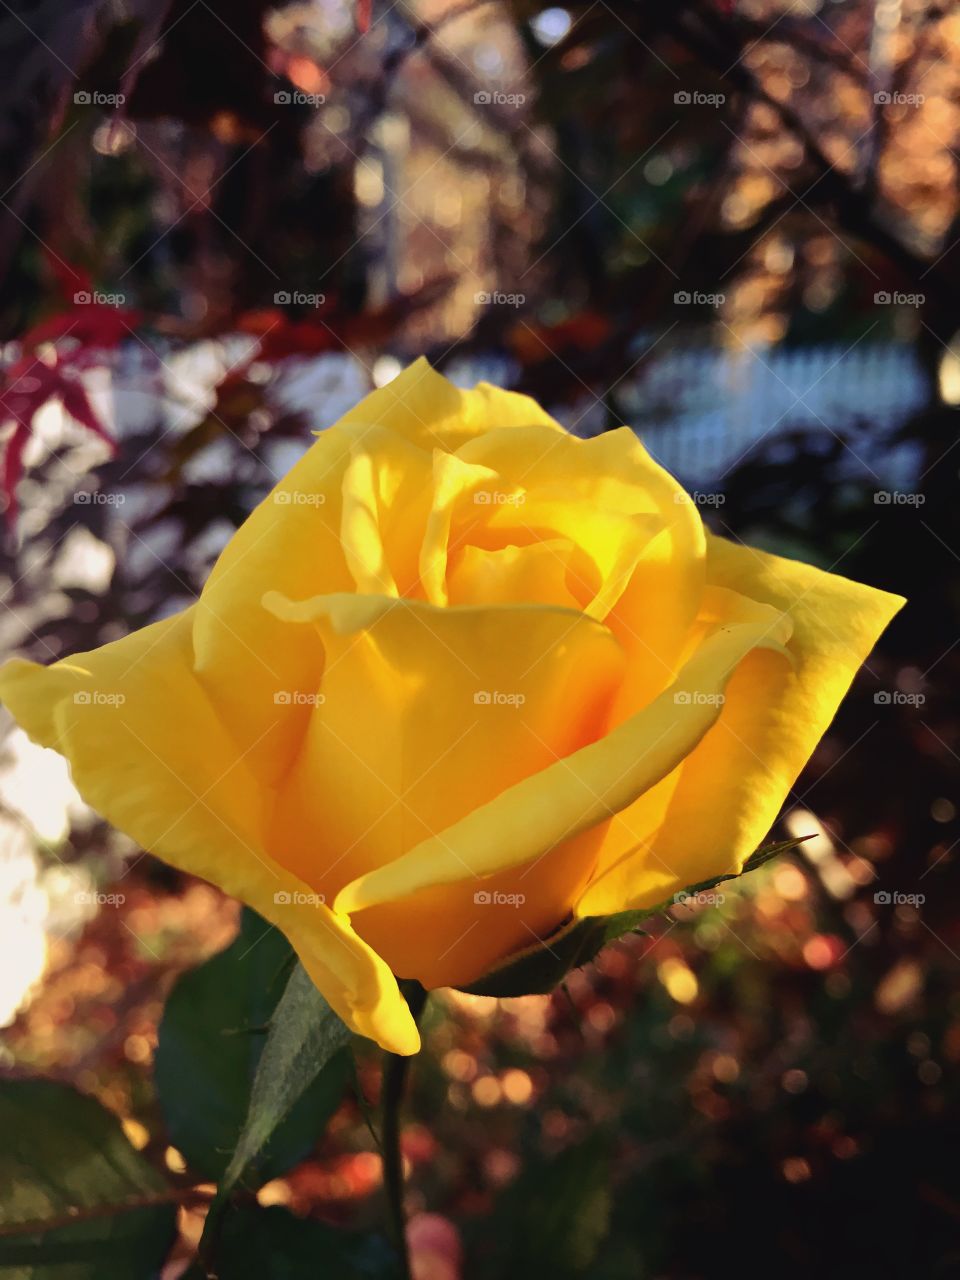 Late Bloomer. This yellow rose, blooming against the Autumn colors of November, reminds us that "late bloomers" are special:)